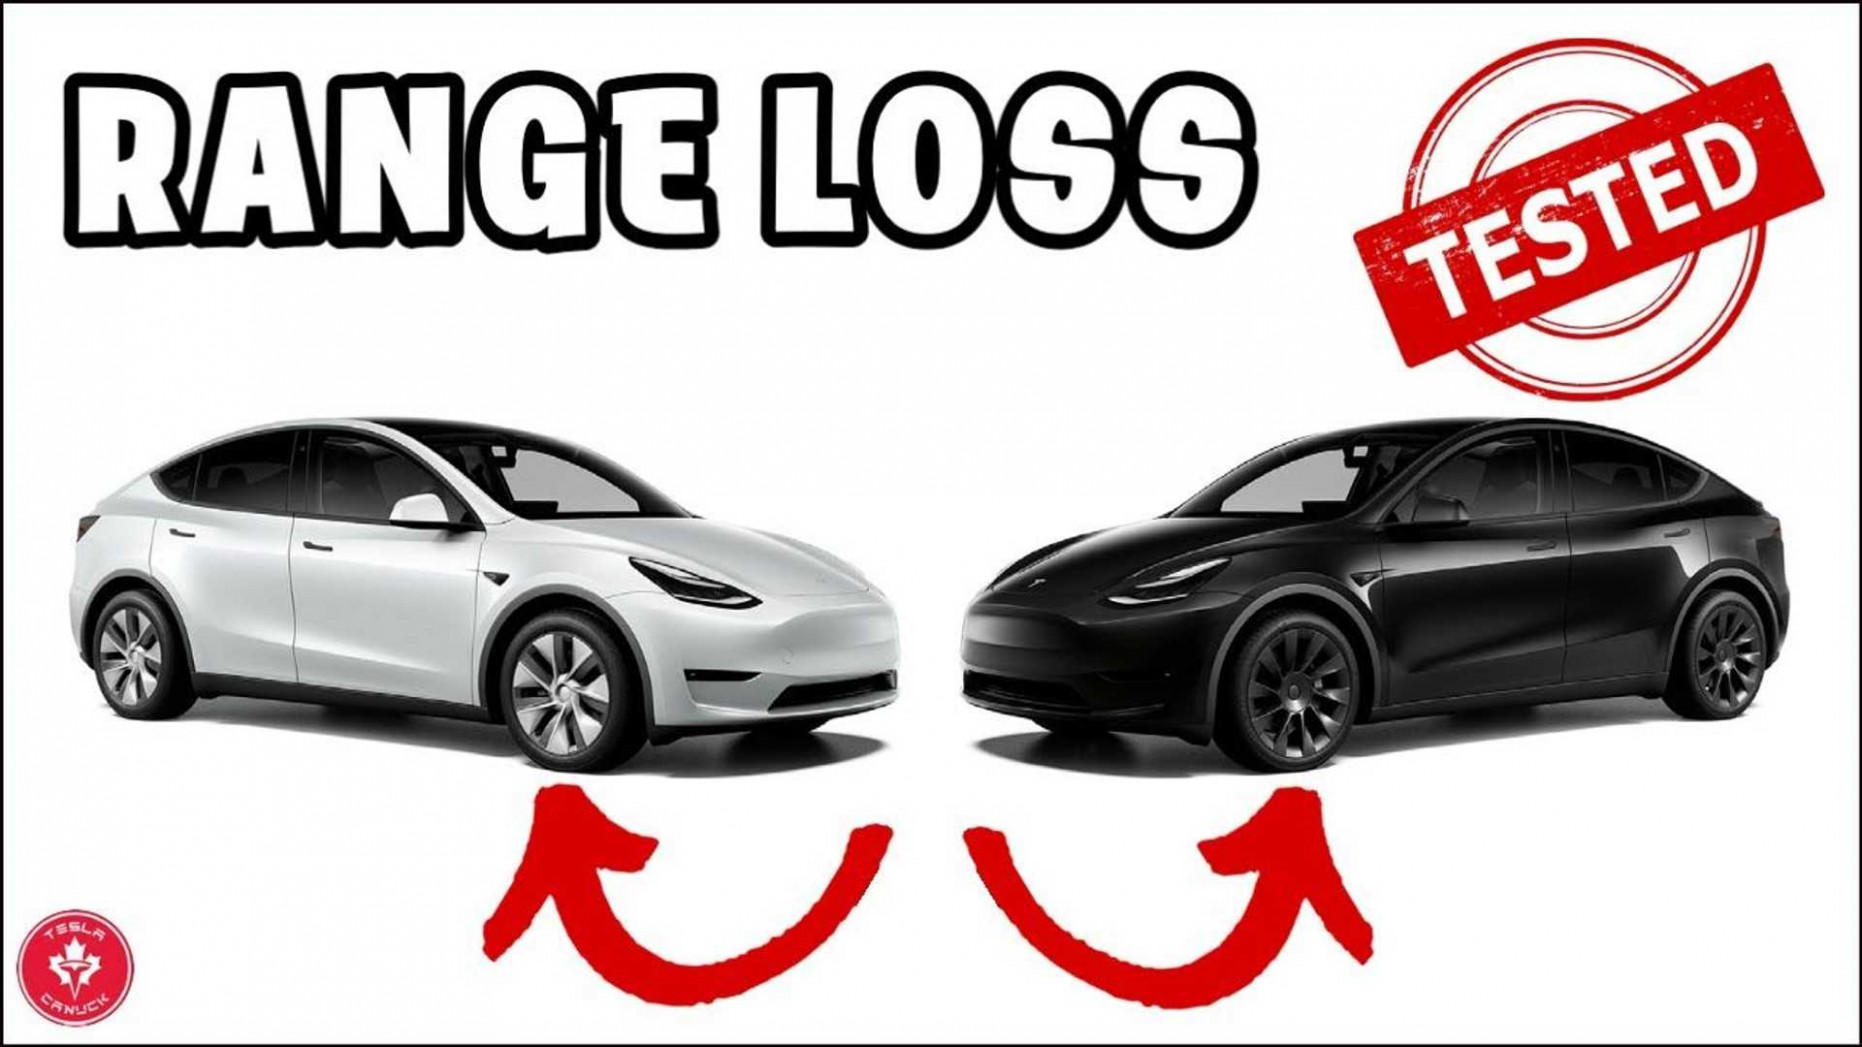 Tesla Model Y Real-World Range Loss With 3-Inch Wheels - tesla model y 19 vs 20 inch wheels